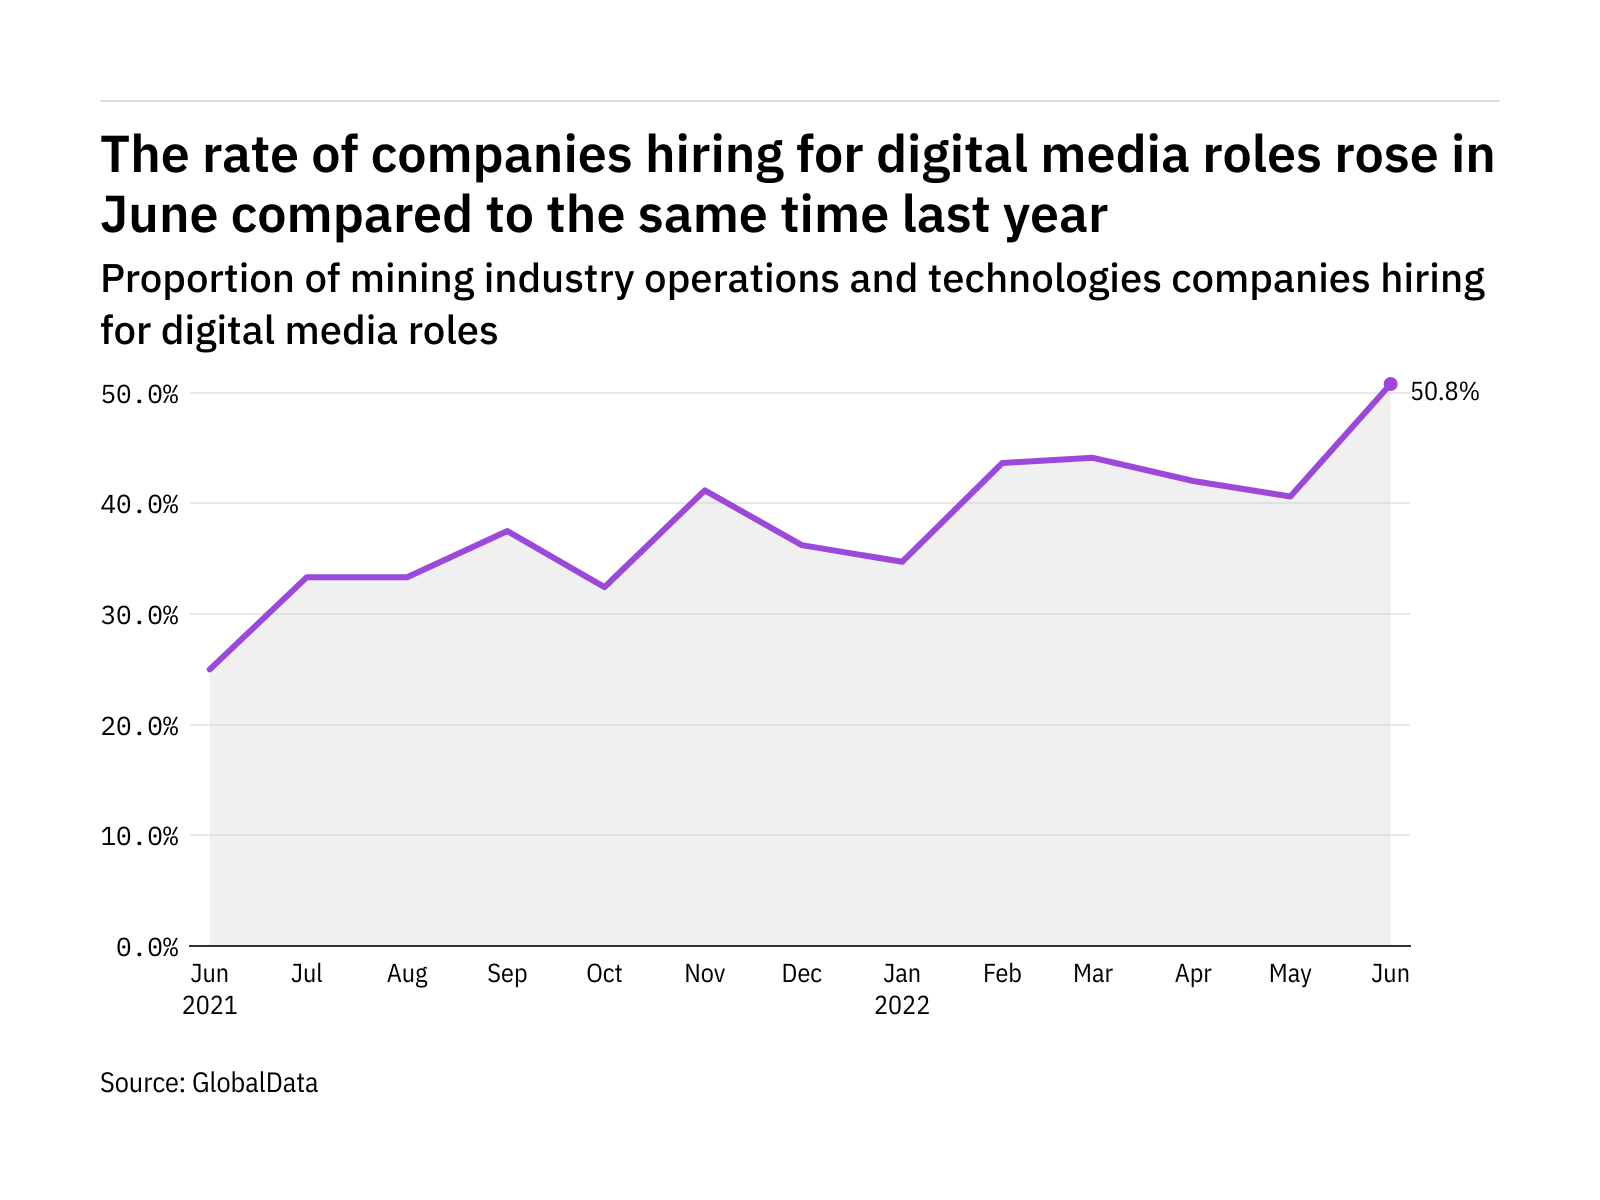 Digital media hiring levels in the mining industry rose to a year-high in June 2022